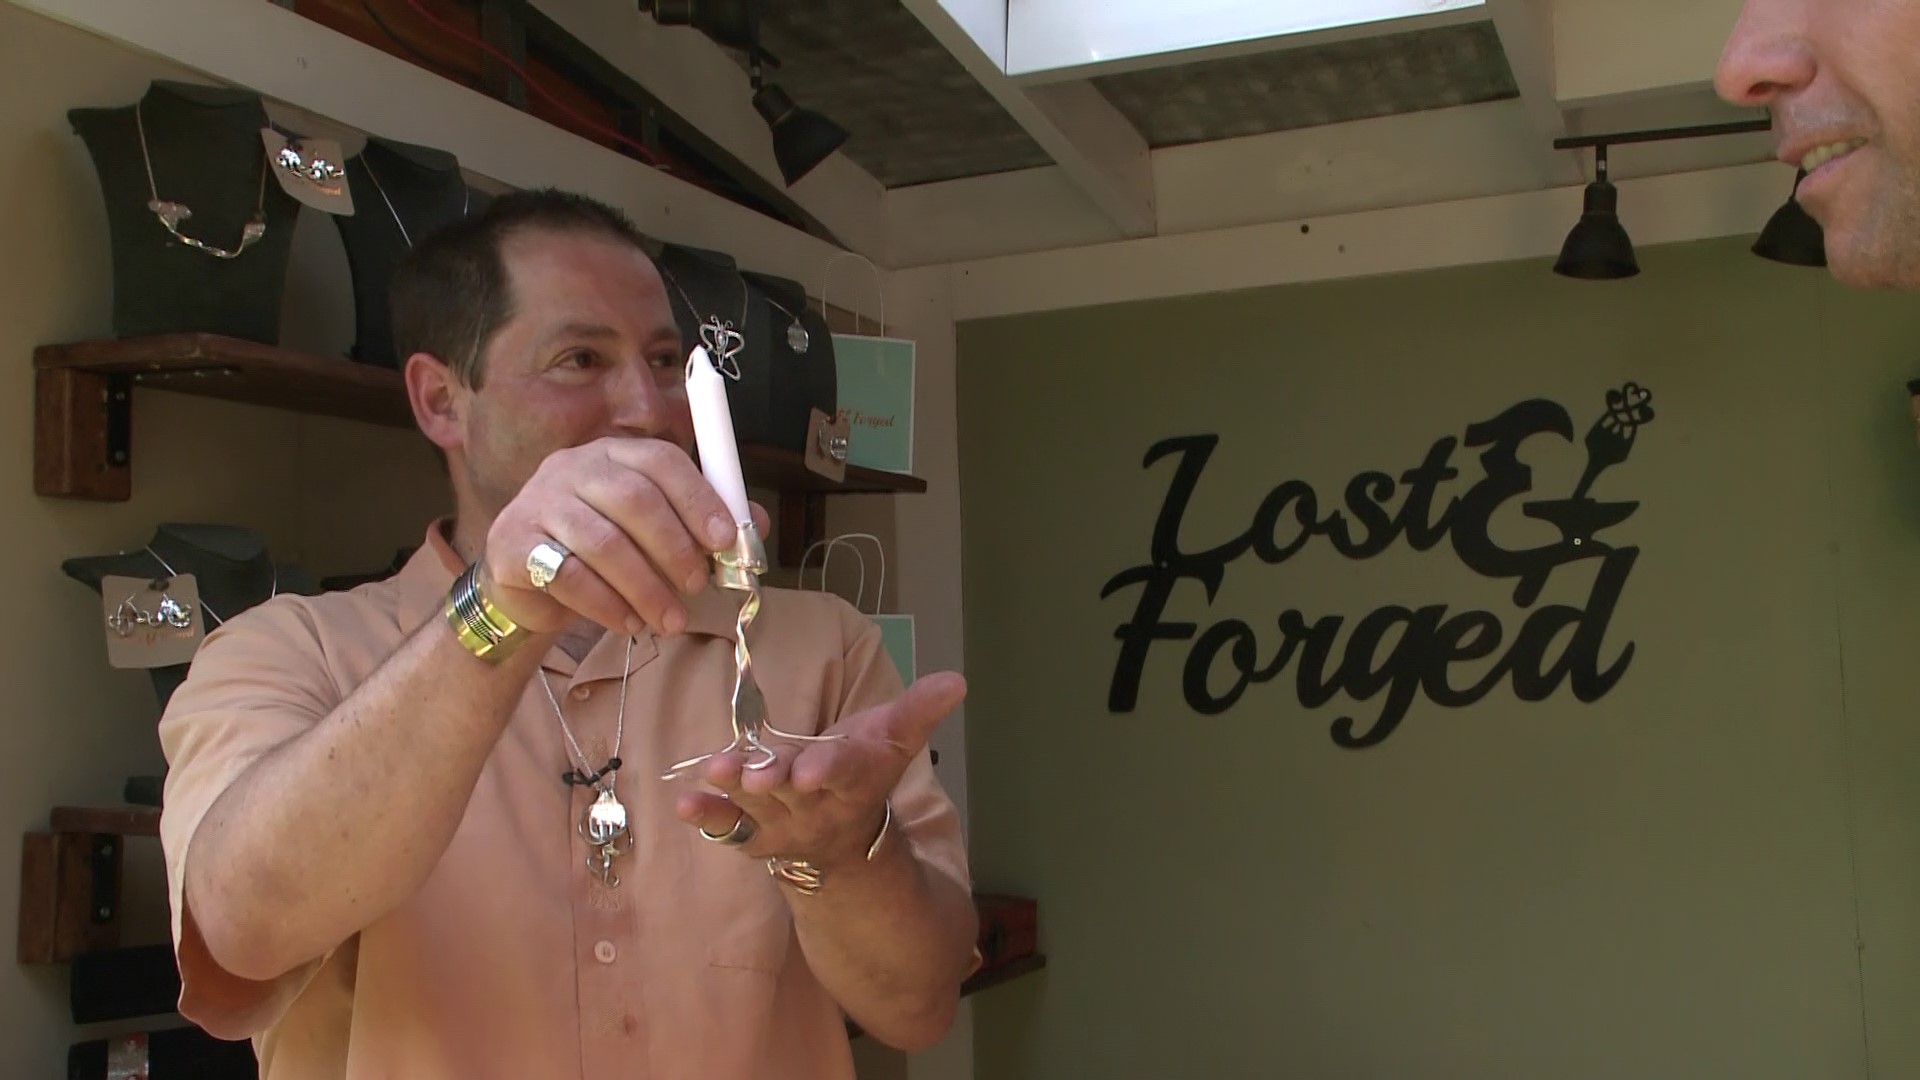 The owner of Lost and Forged wants to celebrate surprising transformations and make upcycling irresistible.